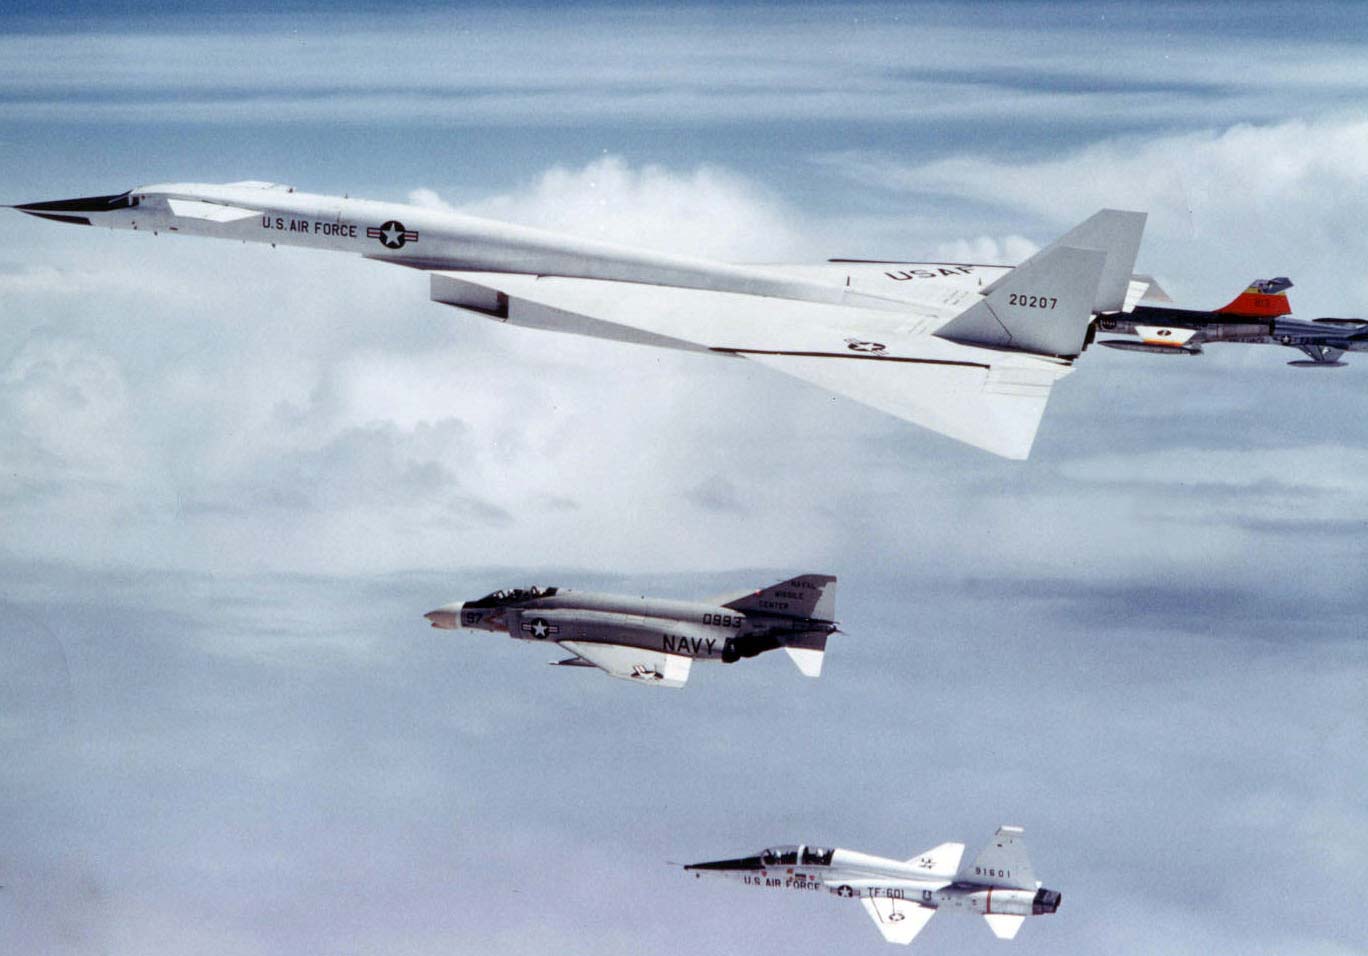 An F-104 Starfighter collides with XB-70 Valkyrie prototype no. 2 destroying both planes during a photo shoot near Edwards Air Force Base